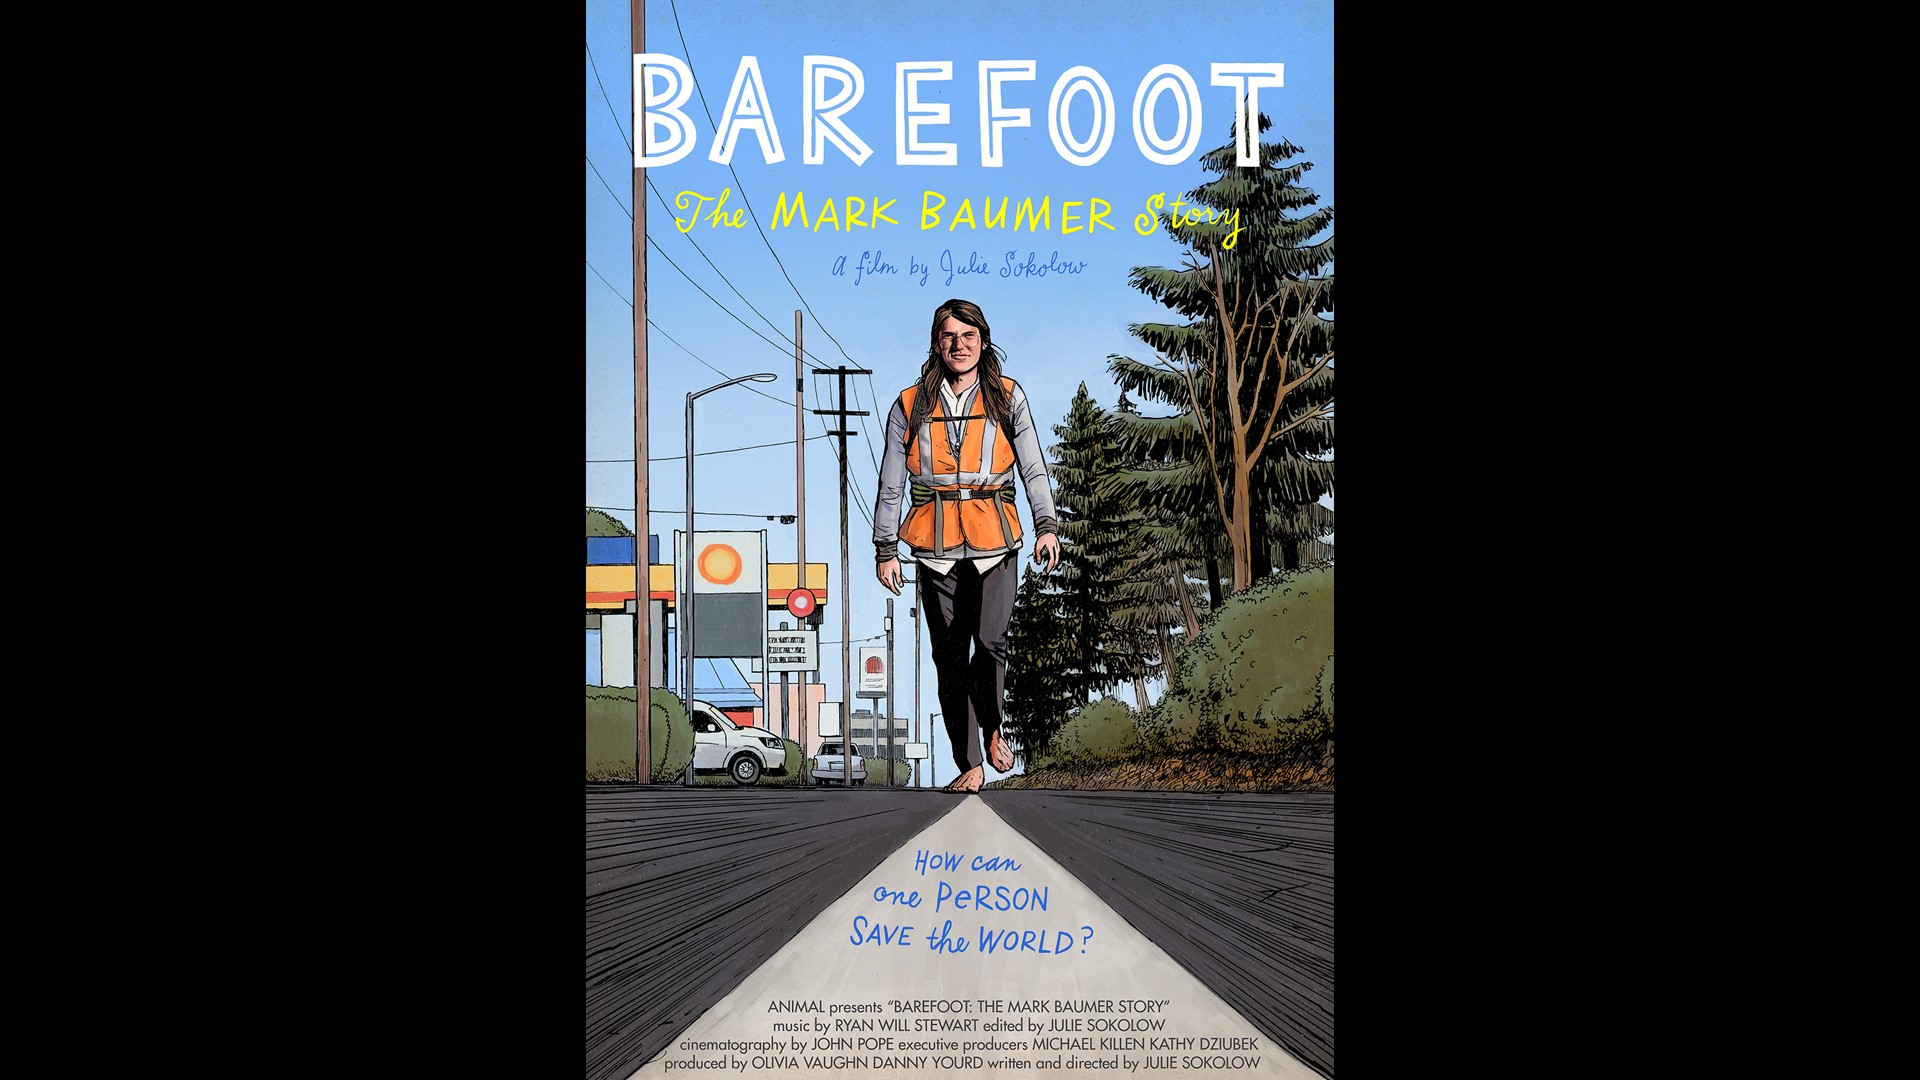 In 2016, Mark Baumer attempted to walk across America barefoot to raise attention for climate change. His journey and life were cut short when he was hit and killed.